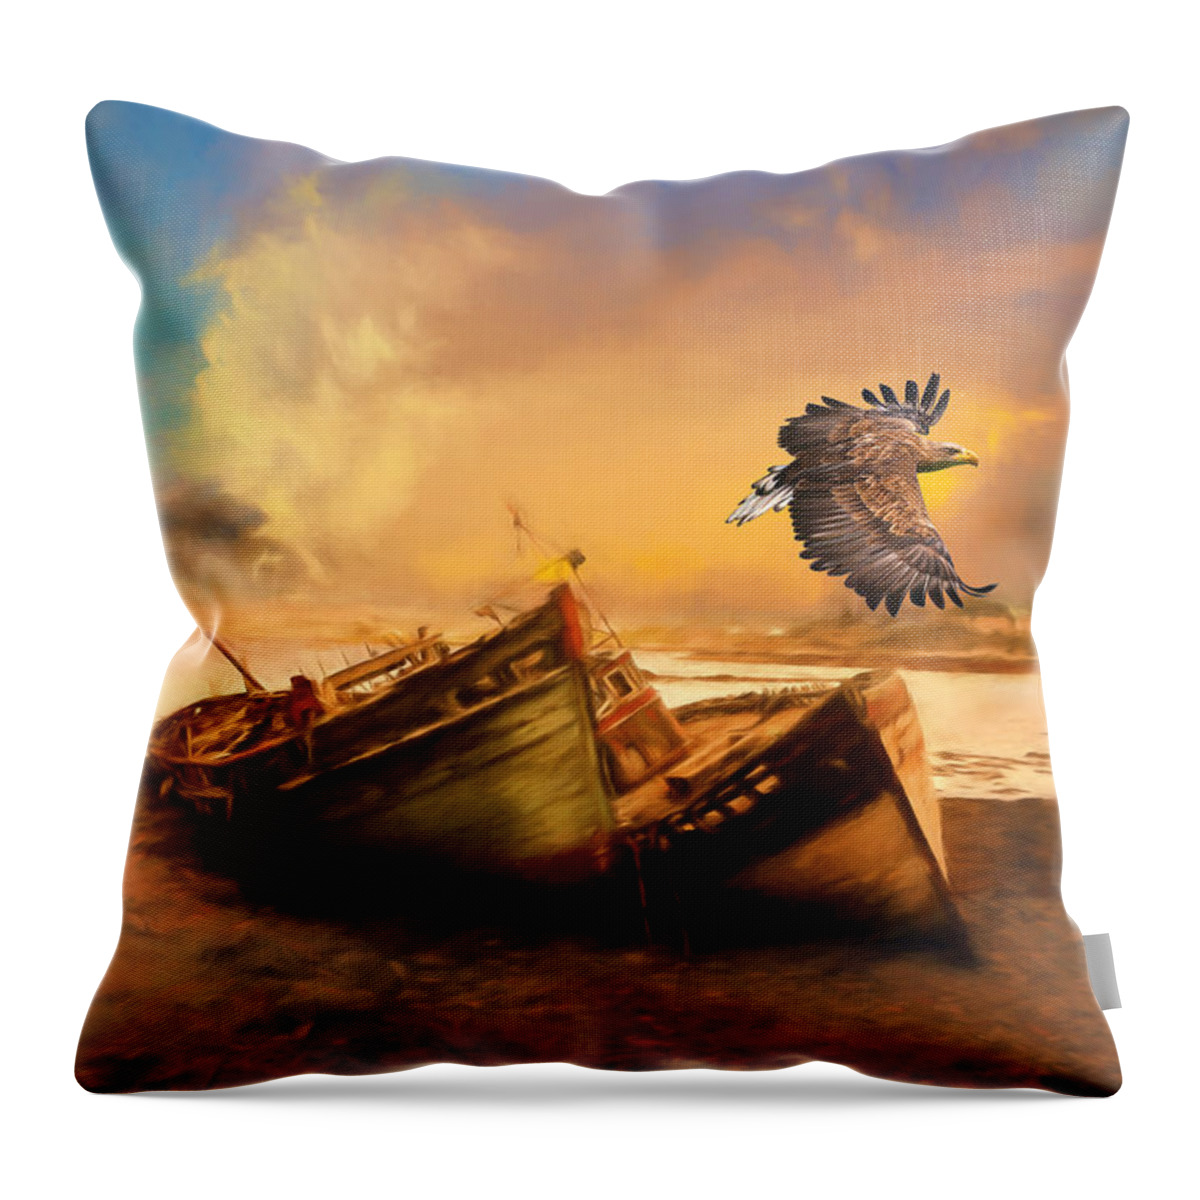 The Eagle And The Boat Throw Pillow featuring the photograph The Eagle And The Boat by Georgiana Romanovna